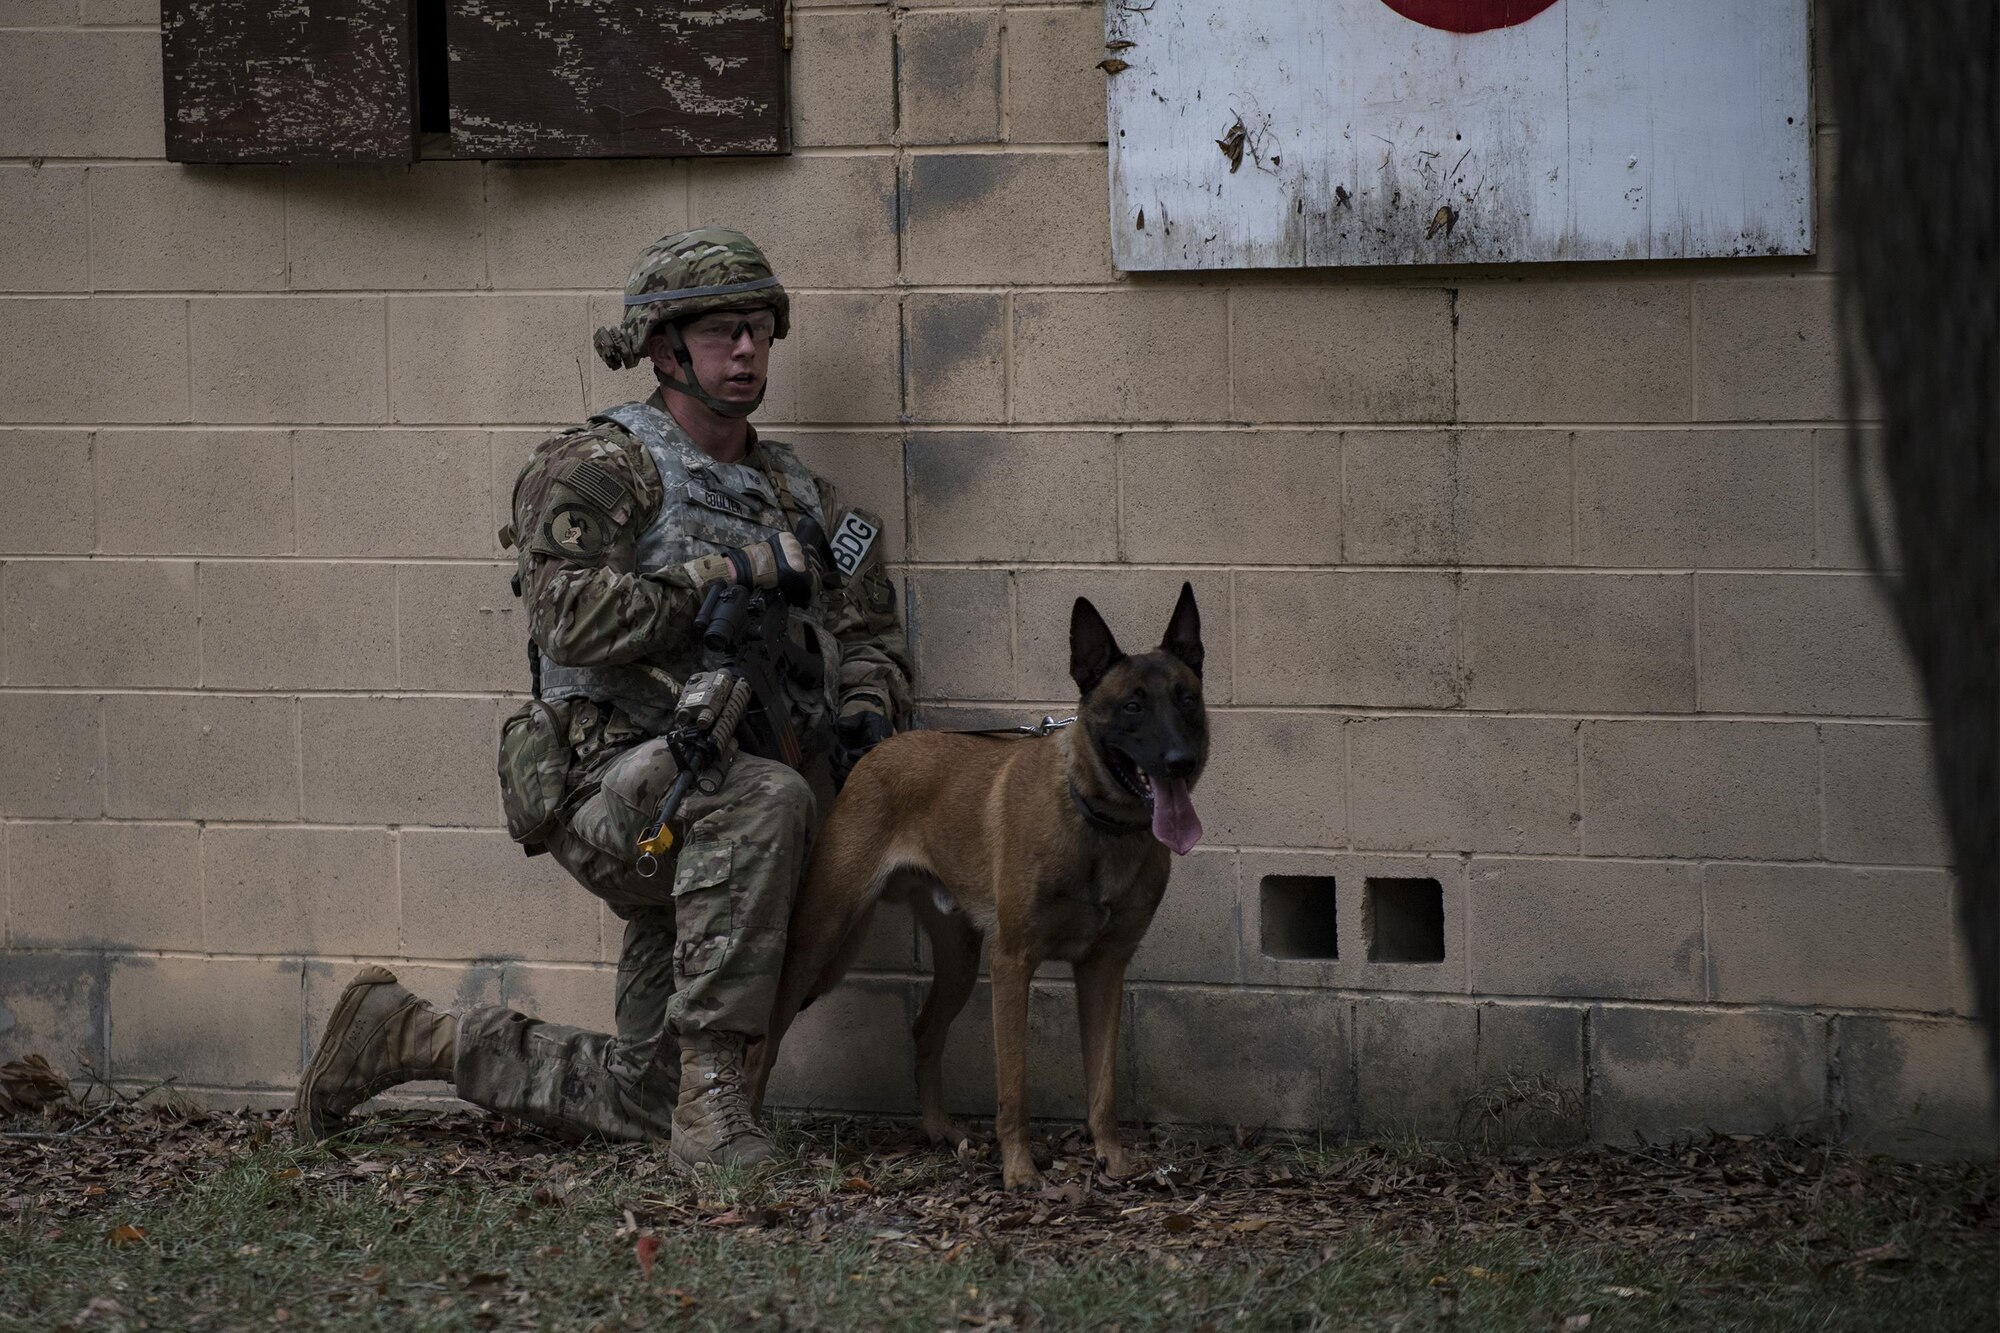 U.S. Air Force Staff Sgt. John Coulter, 824th Base Defense Squadron military working dog handler, and MWD Ttyrant, simulate securing the area Oct. 6, 2016, at Moody Air Force Base, Ga. Ttyrant is trained and certified on patrol and bomb detection. (U.S. Air Force photo by Airman 1st Class Daniel Snider)